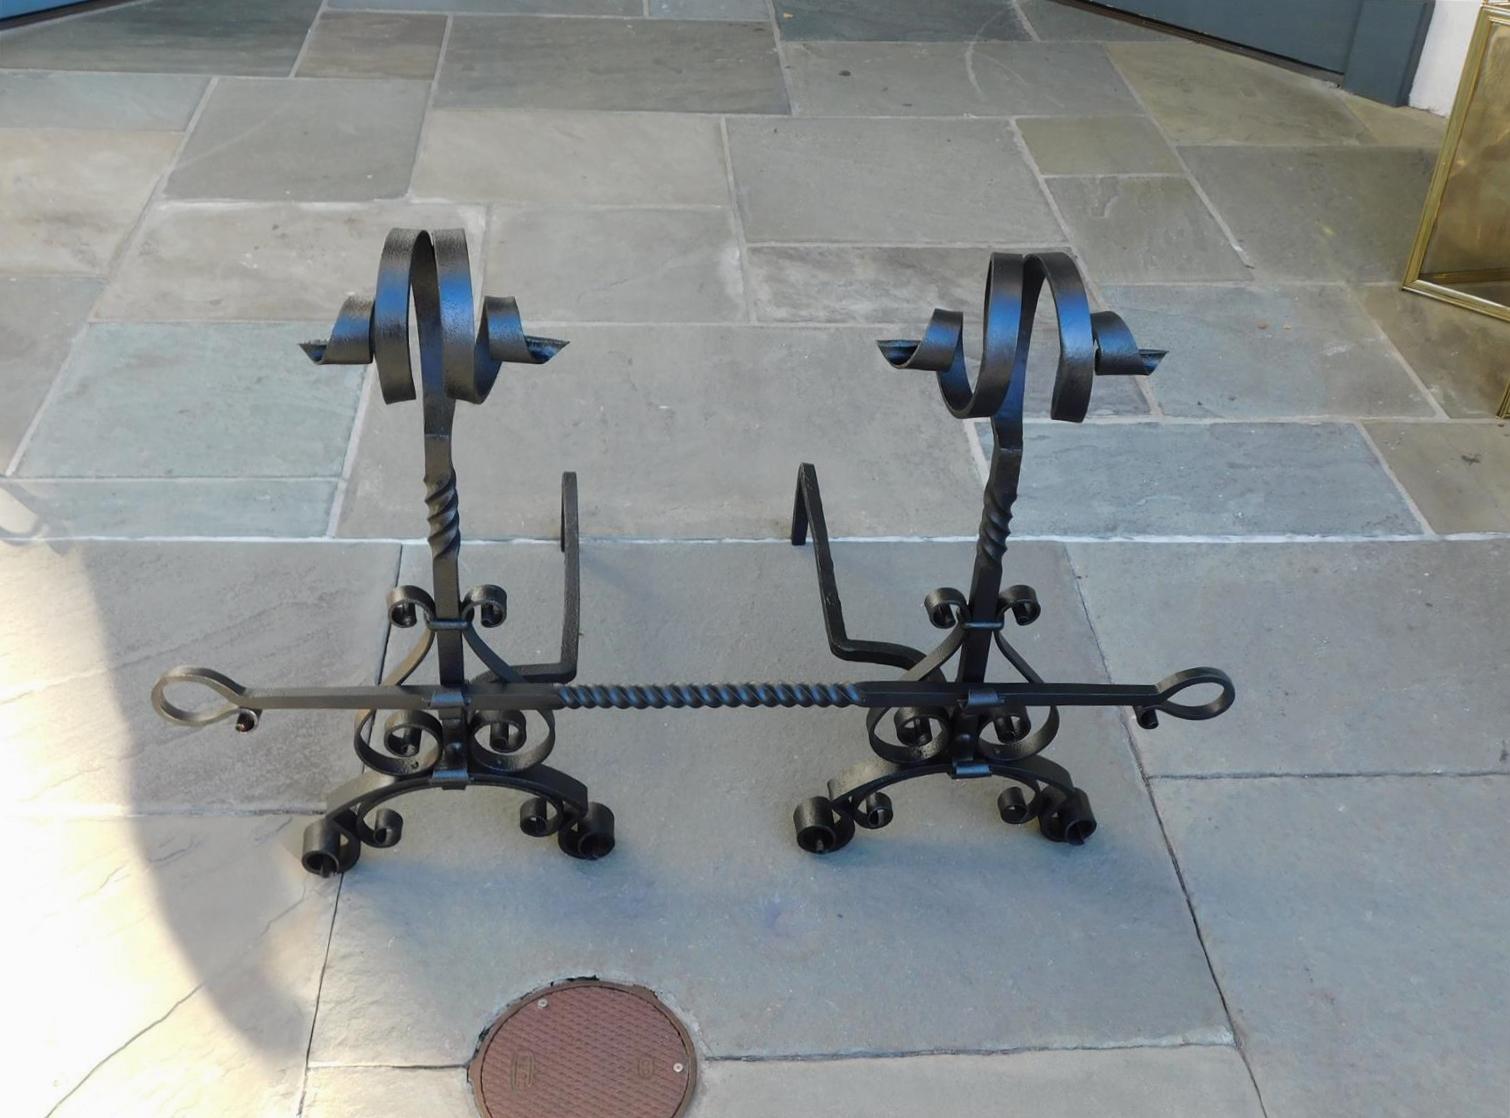 Pair of American wrought iron flanking scrolled finial andirons with centered spiraled columns, scrolled plinths, decorative spiraled scrolled cross bar, and resting on matching scrolled legs. Mid-19th century.